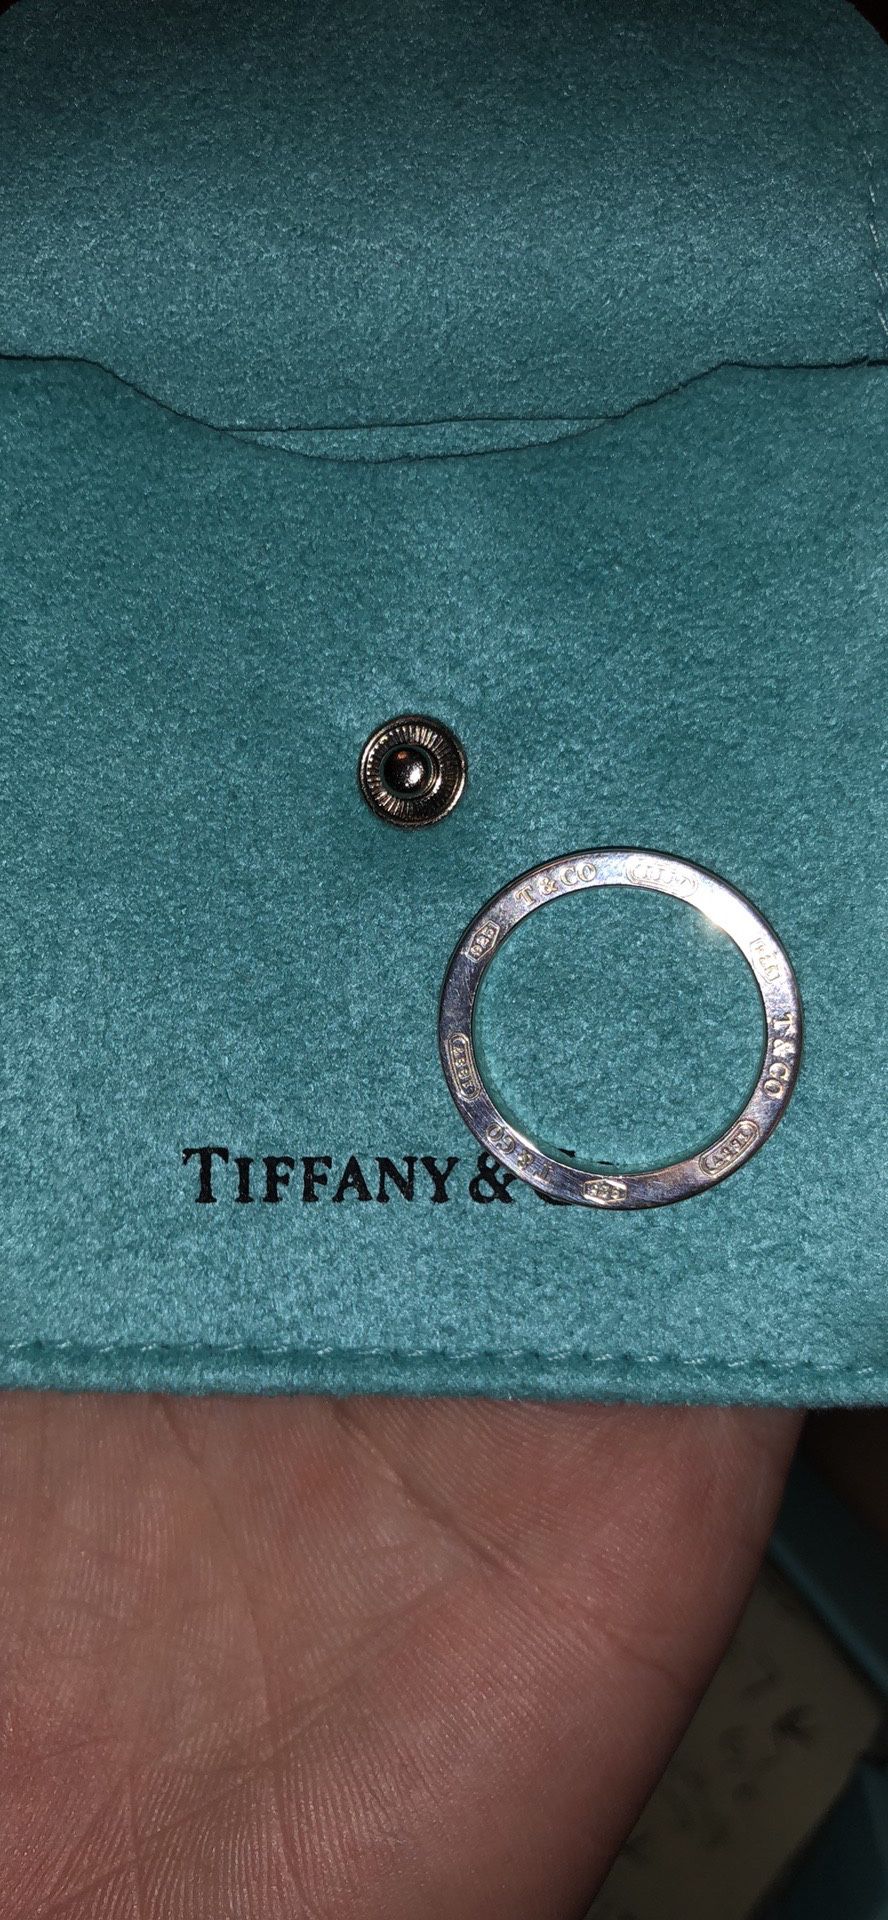 Tiffany & Co. Silver and Diamond Ring